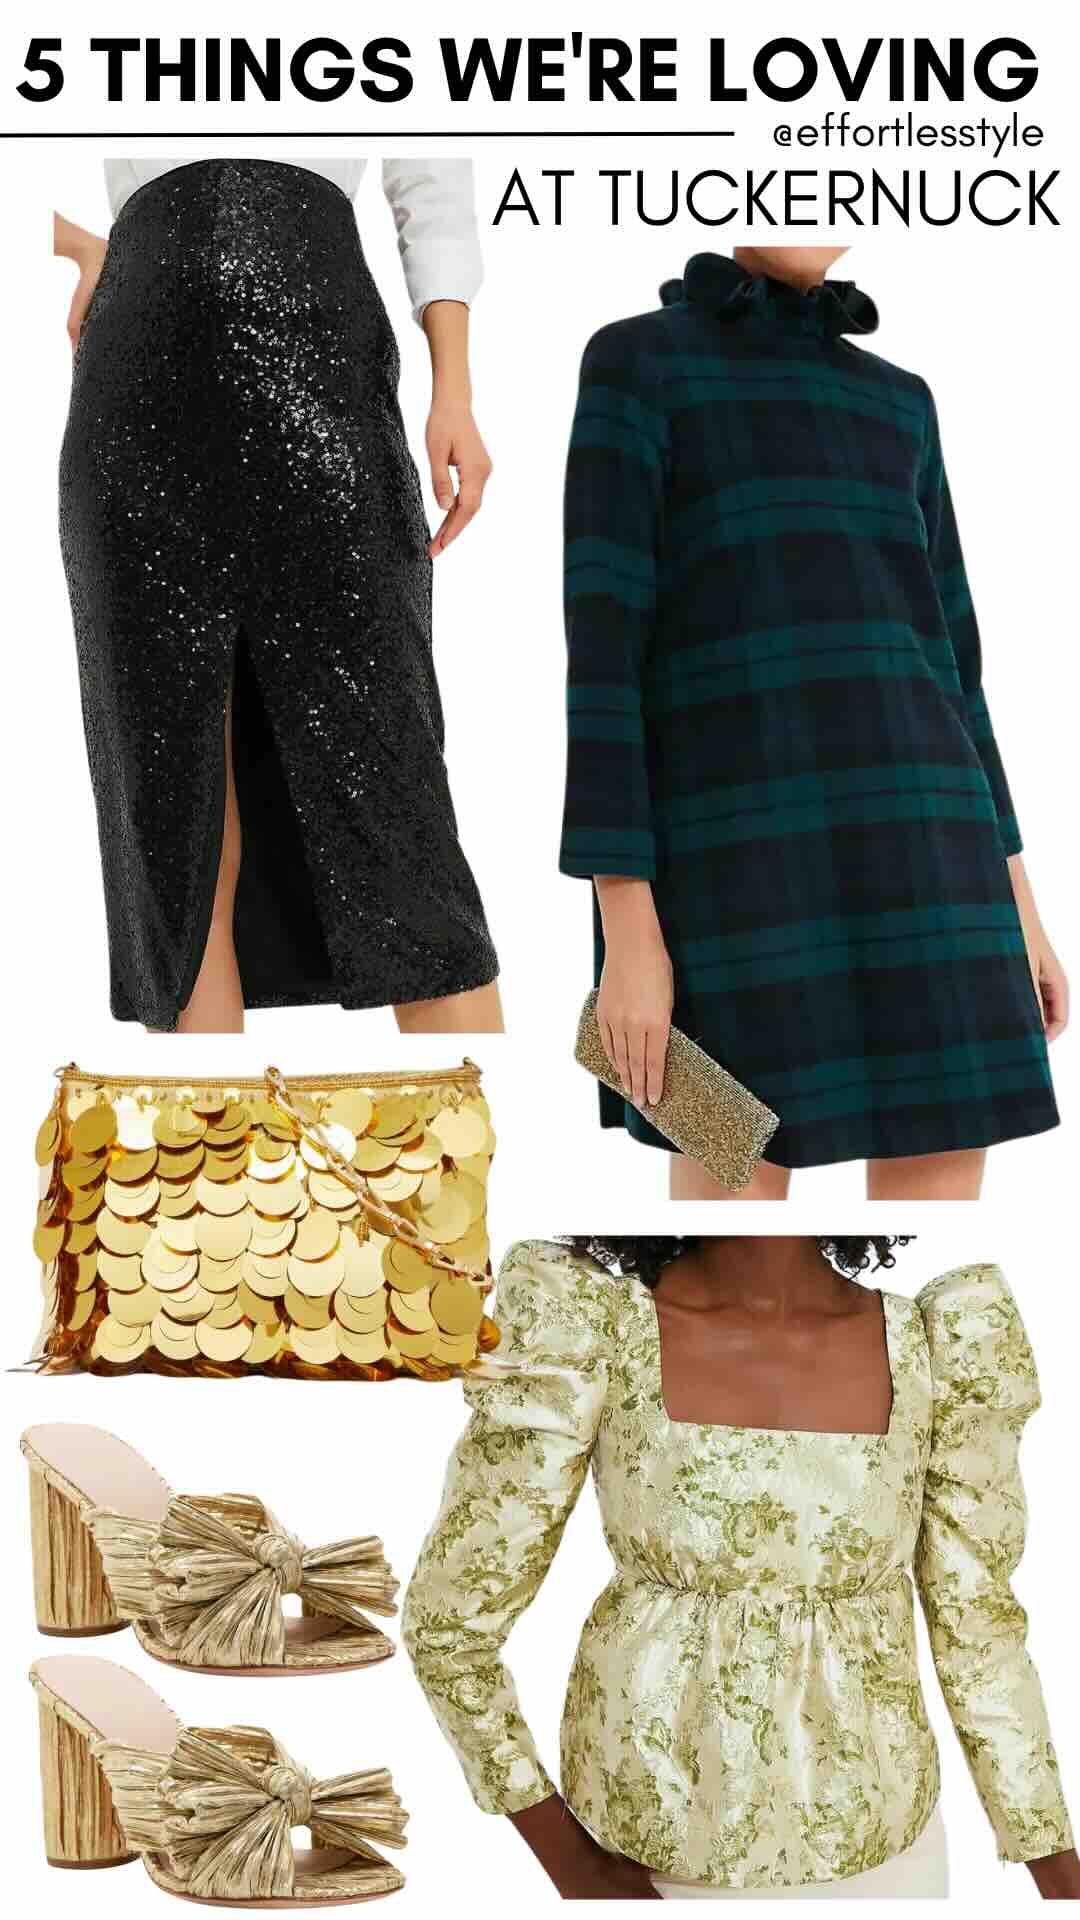 Five Things We Are Loving For The Holidays At Tuckernuck fun holiday pieces must have pieces for the holidays personal stylists share holiday style inspo nashville stylists share holiday inspired pieces what to buy for holiday parties what to wear to Christmas parties how to shop at tuckernuck for the holidays